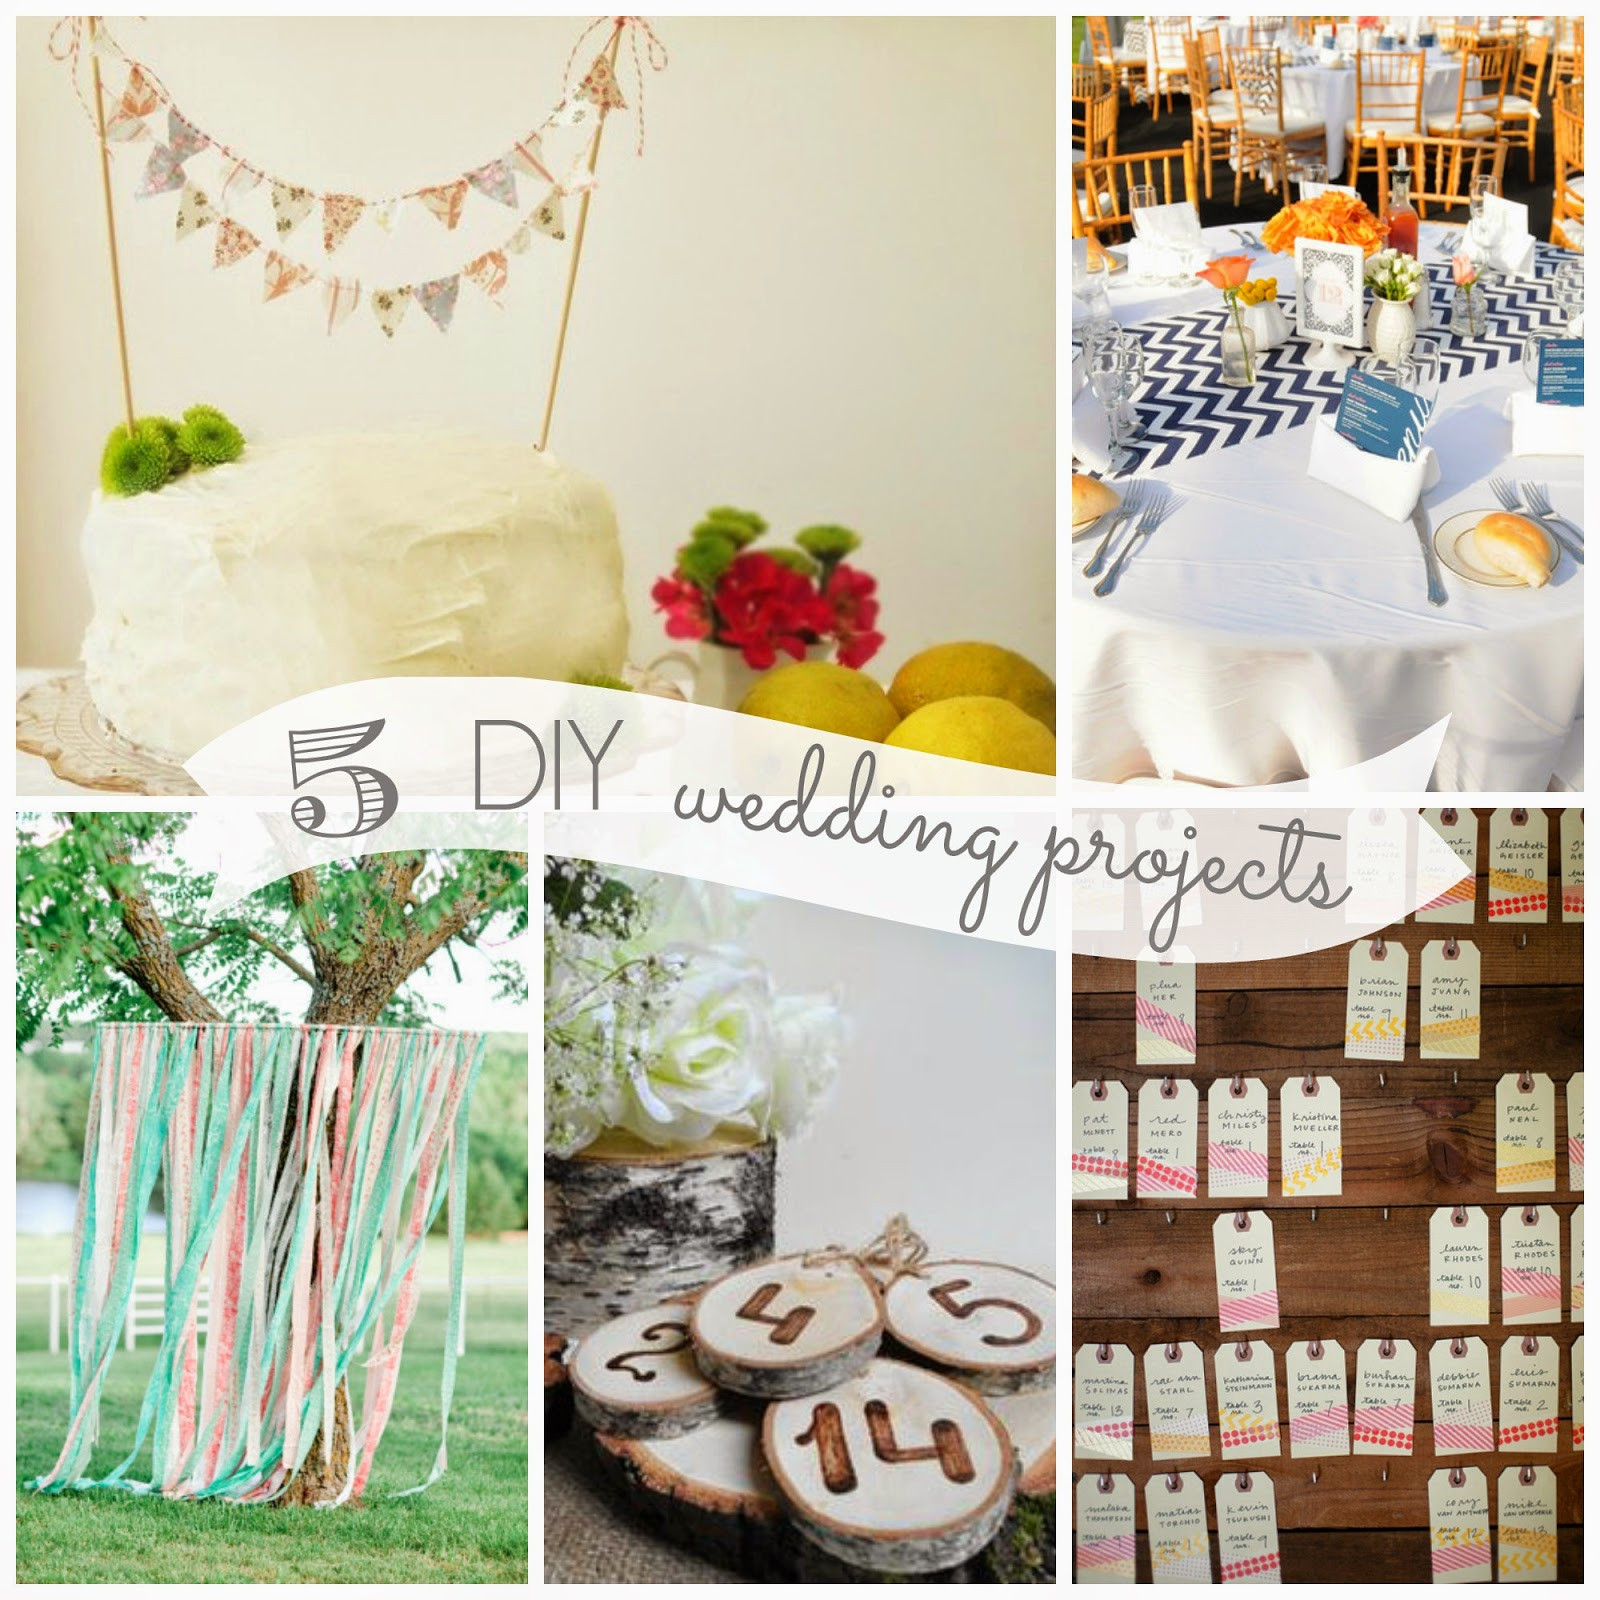 Best ideas about DIY Wedding Project
. Save or Pin the picket fence projects I do DIY wedding projects Now.